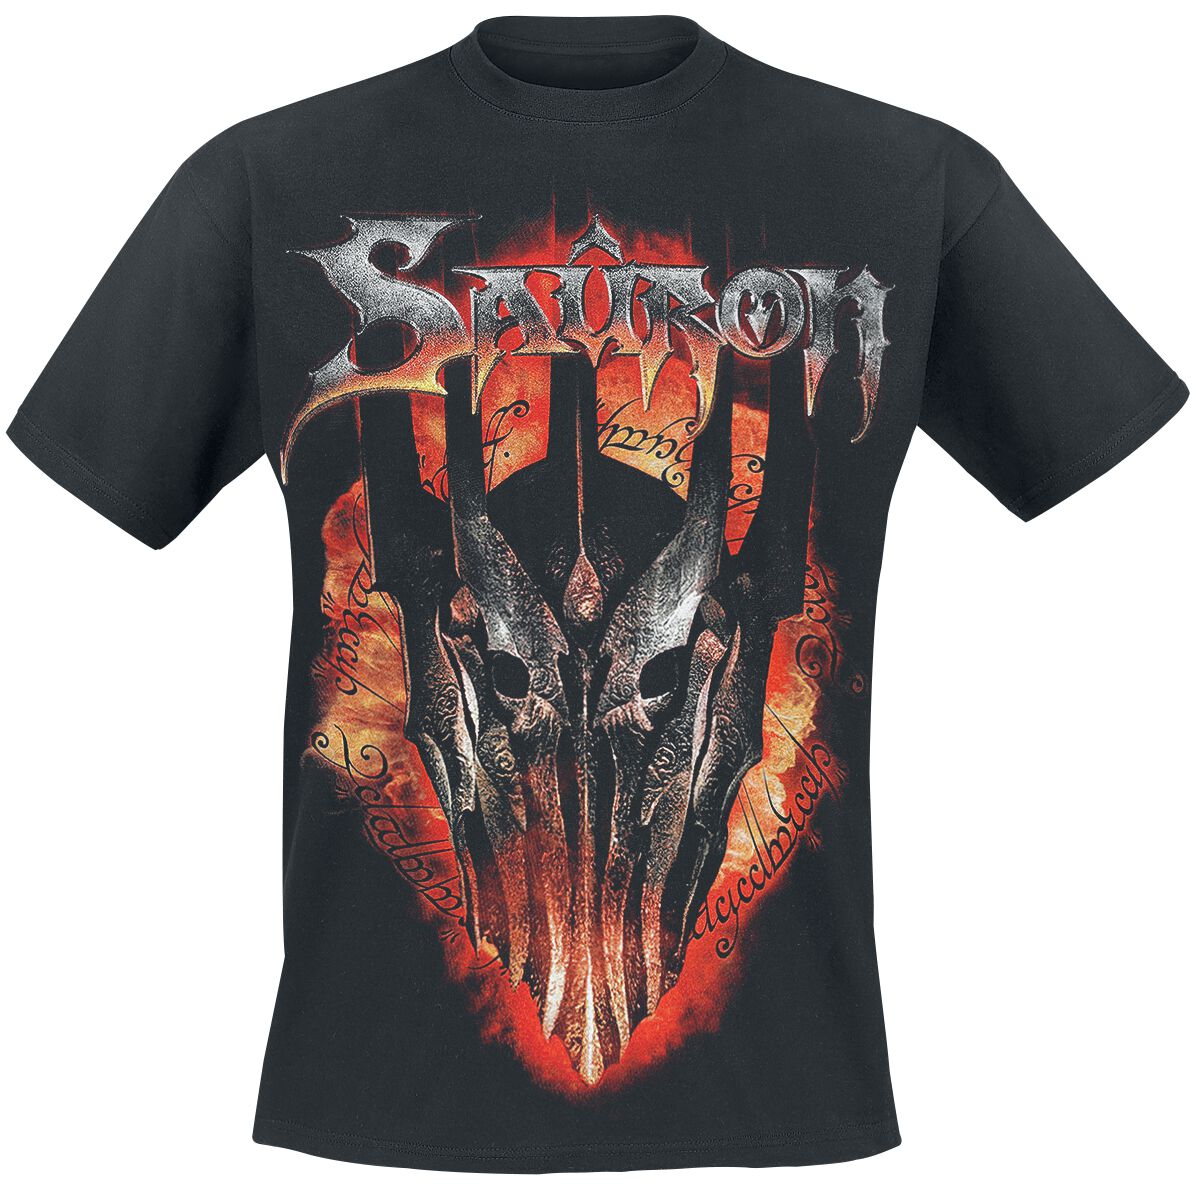 Set up the table Dollar irony Sauron | The Lord Of The Rings T-Shirt | EMP